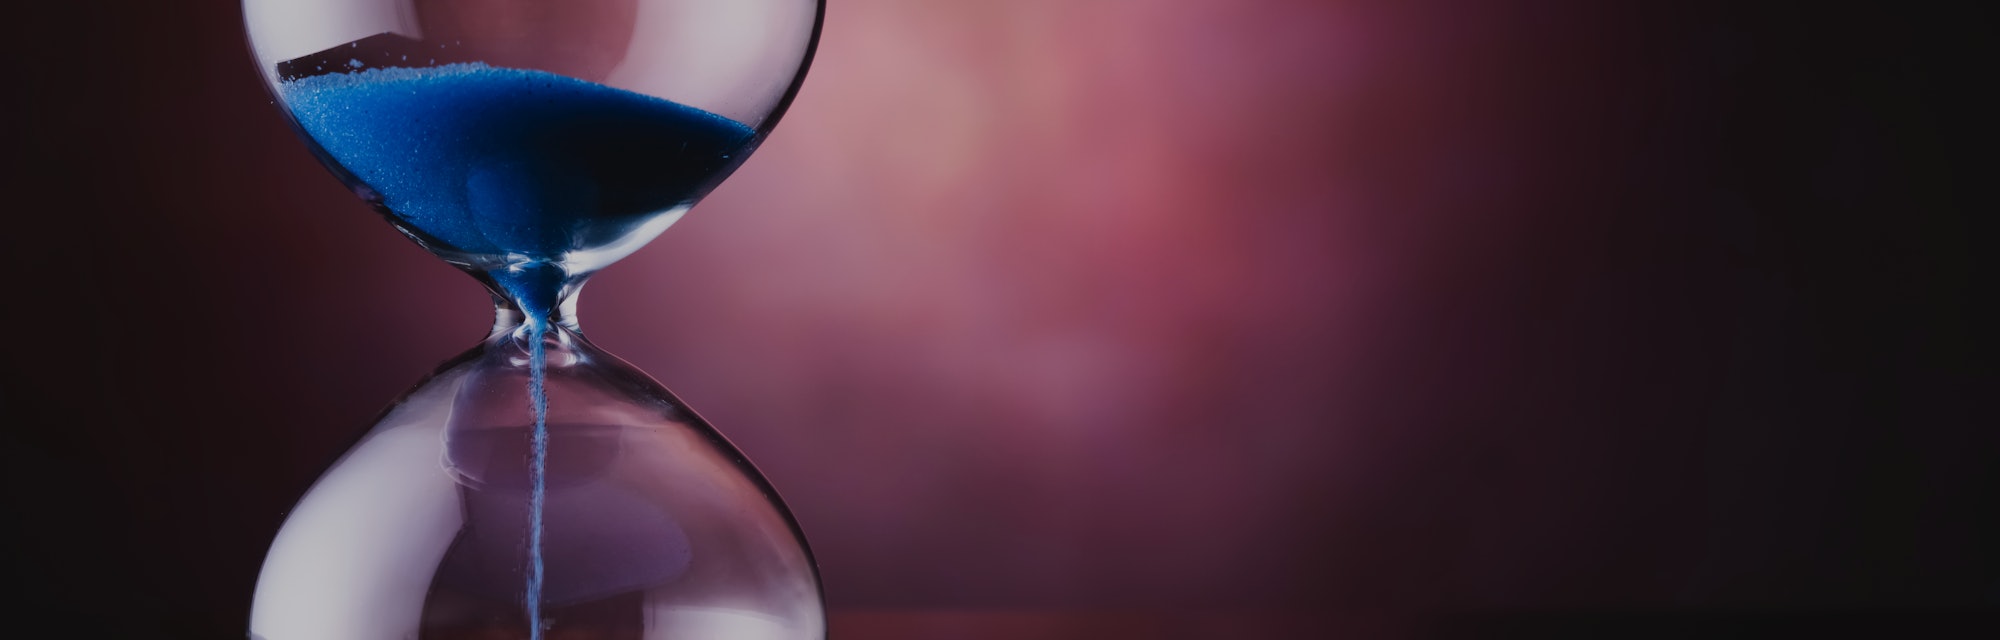 Blue sand hourglass on old background